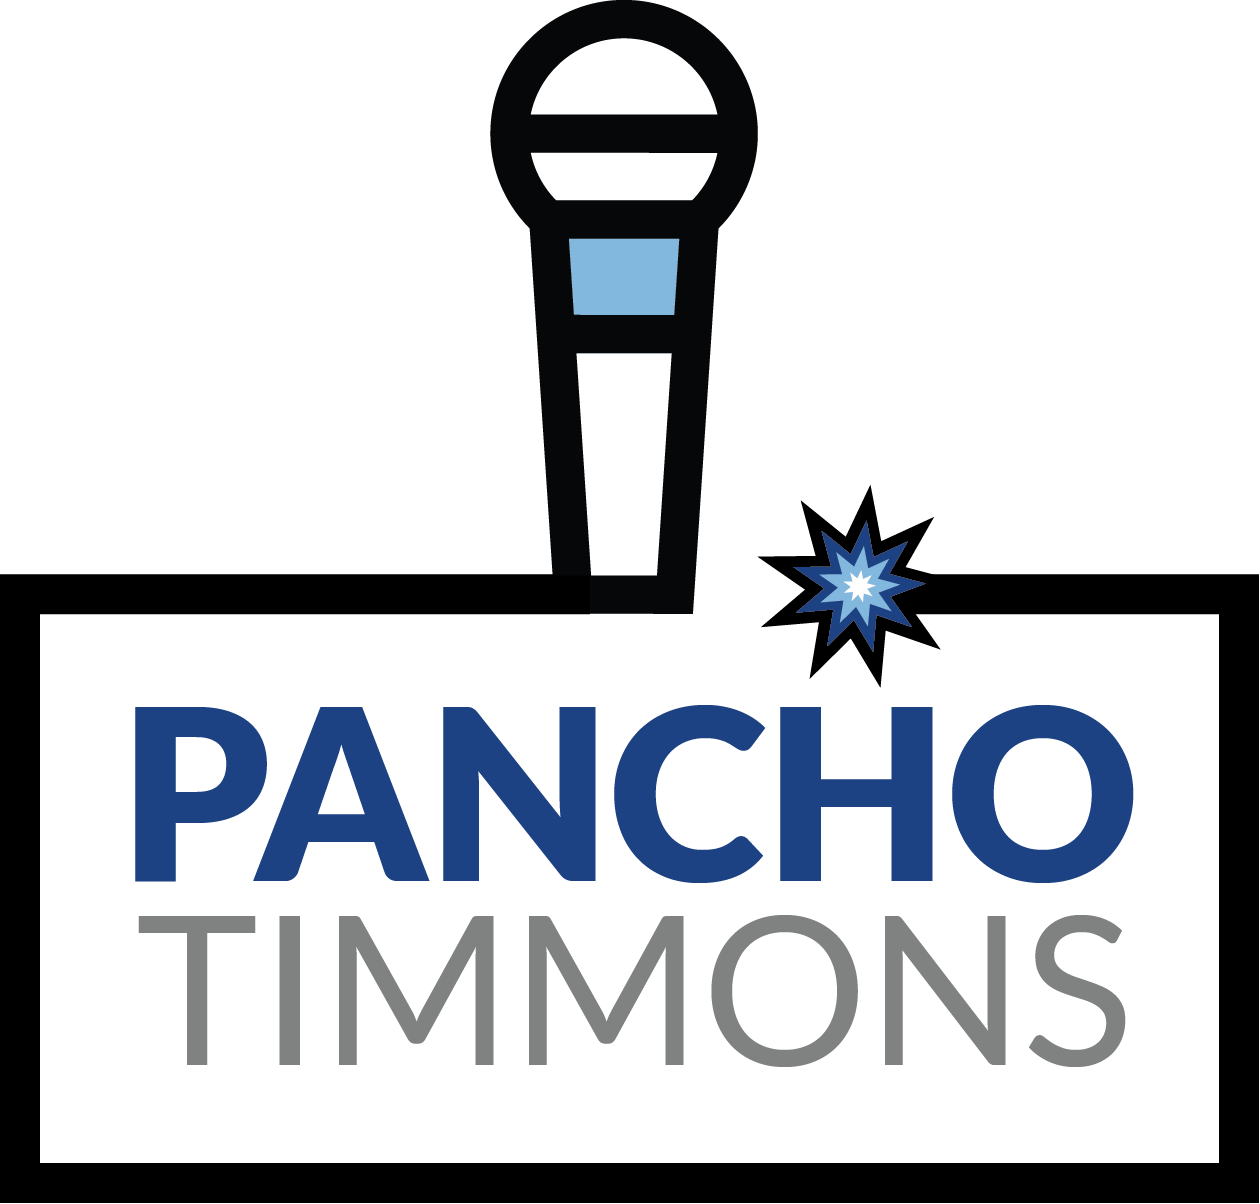 Pancho Timmons